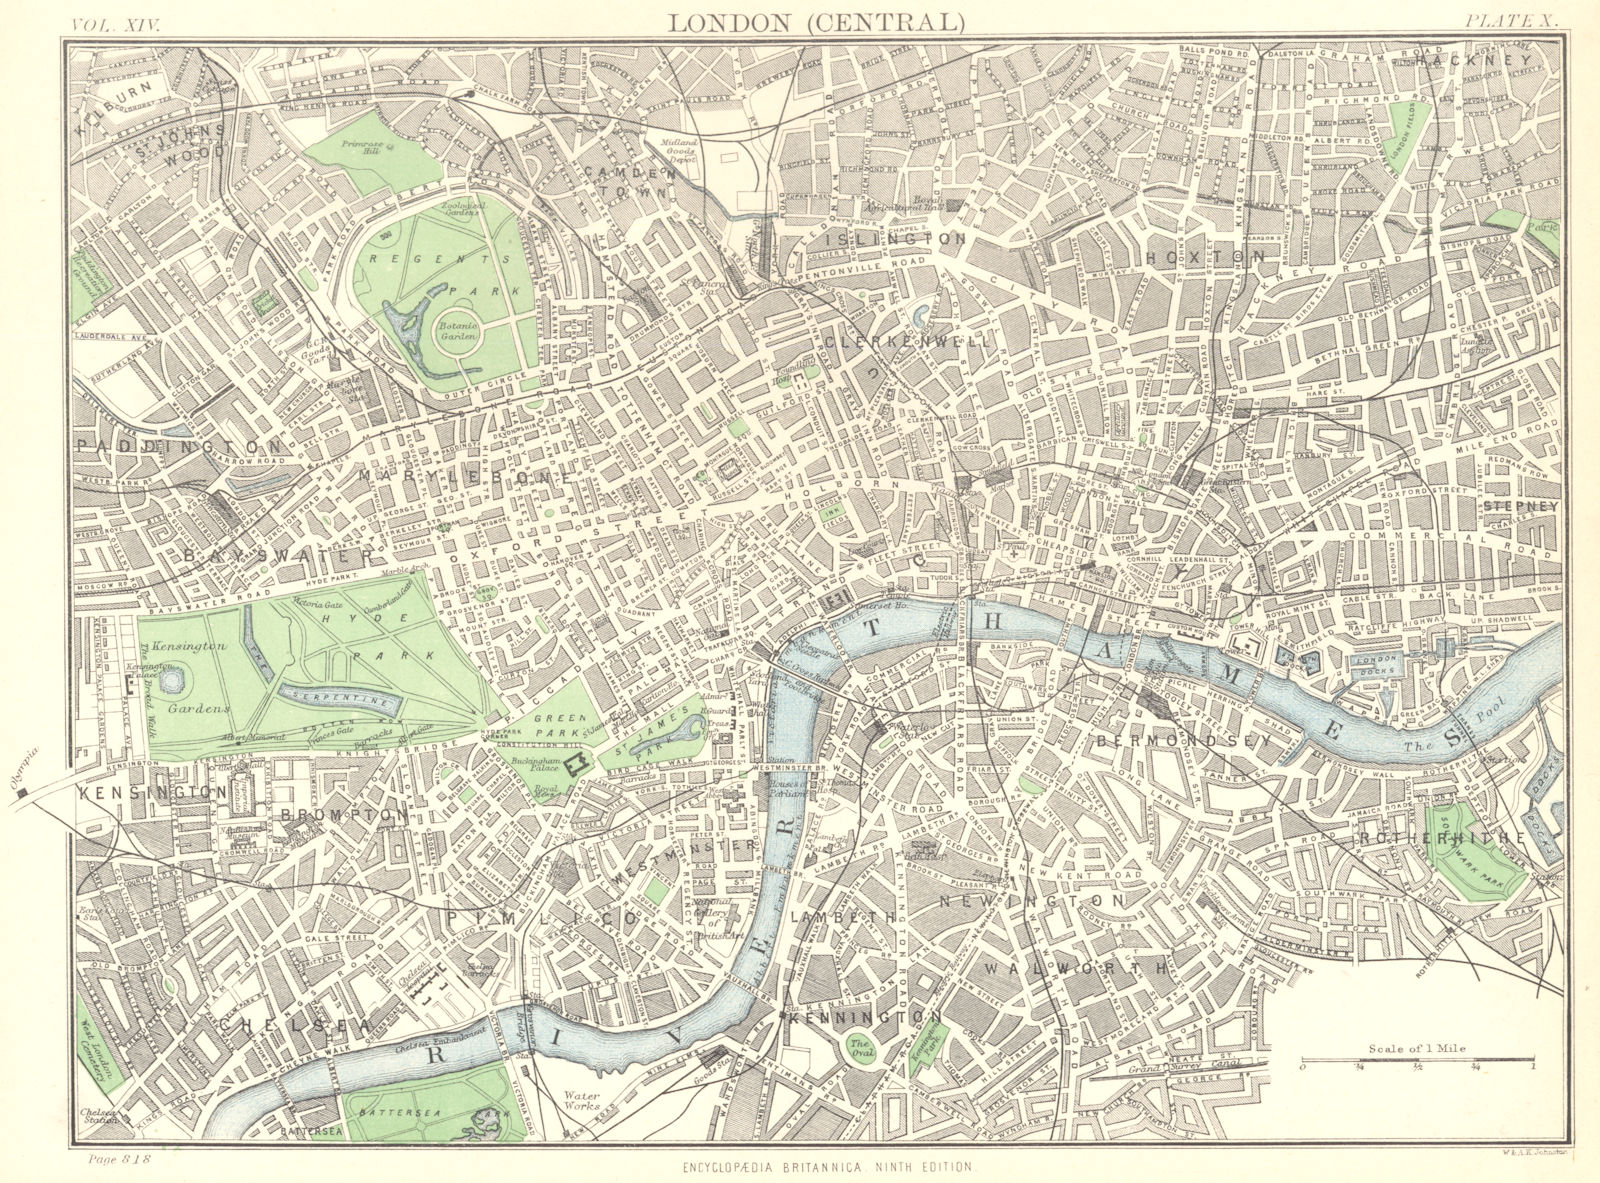 LONDON. London (Central) town city plan map . Britannica 9th edition 1898